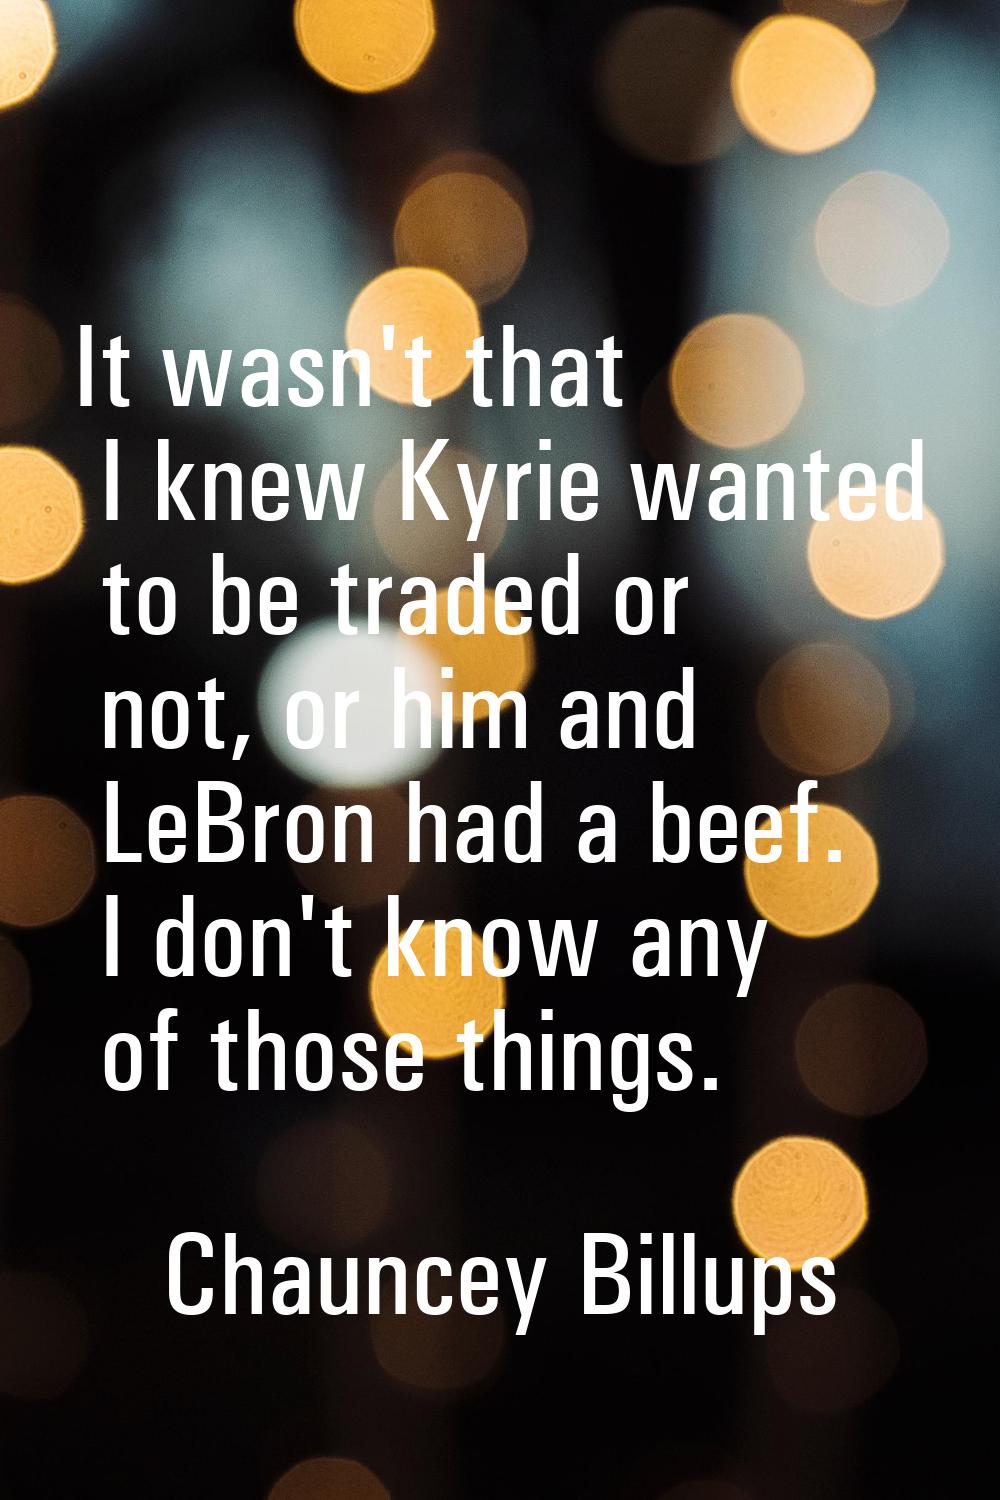 It wasn't that I knew Kyrie wanted to be traded or not, or him and LeBron had a beef. I don't know 